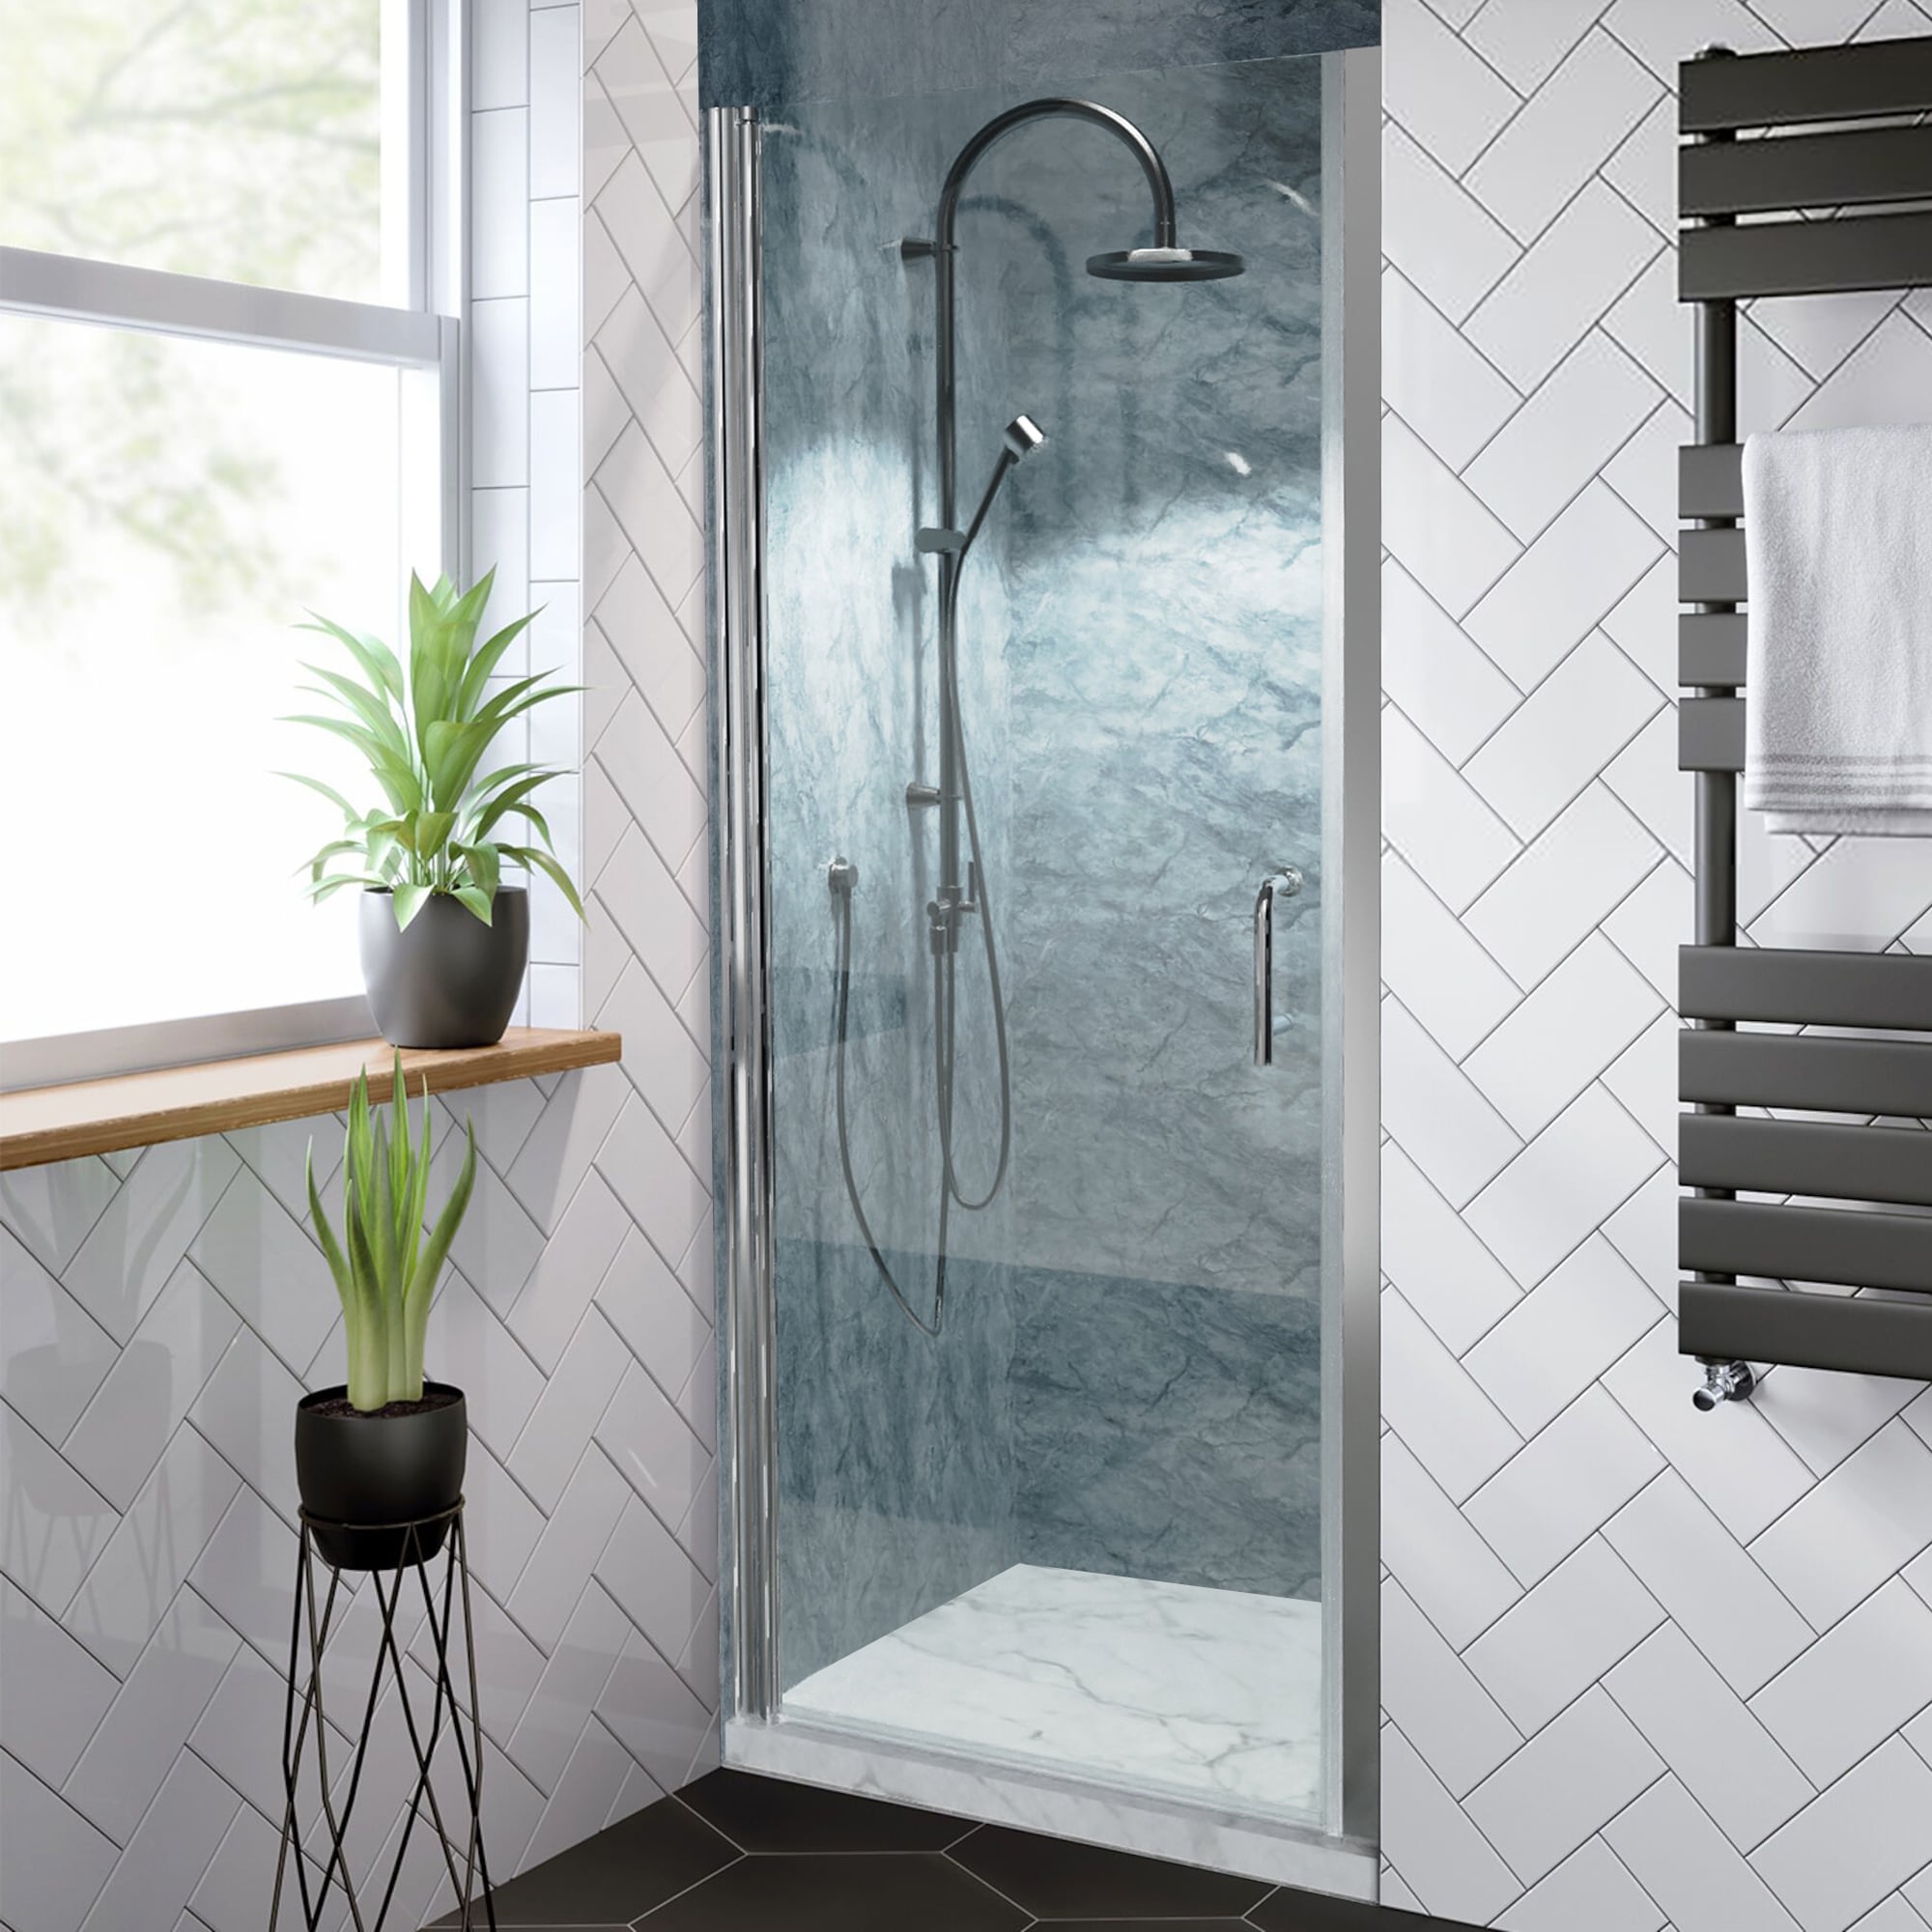 ANZZI 72 x 24 inch frameless shower door in polished chrome